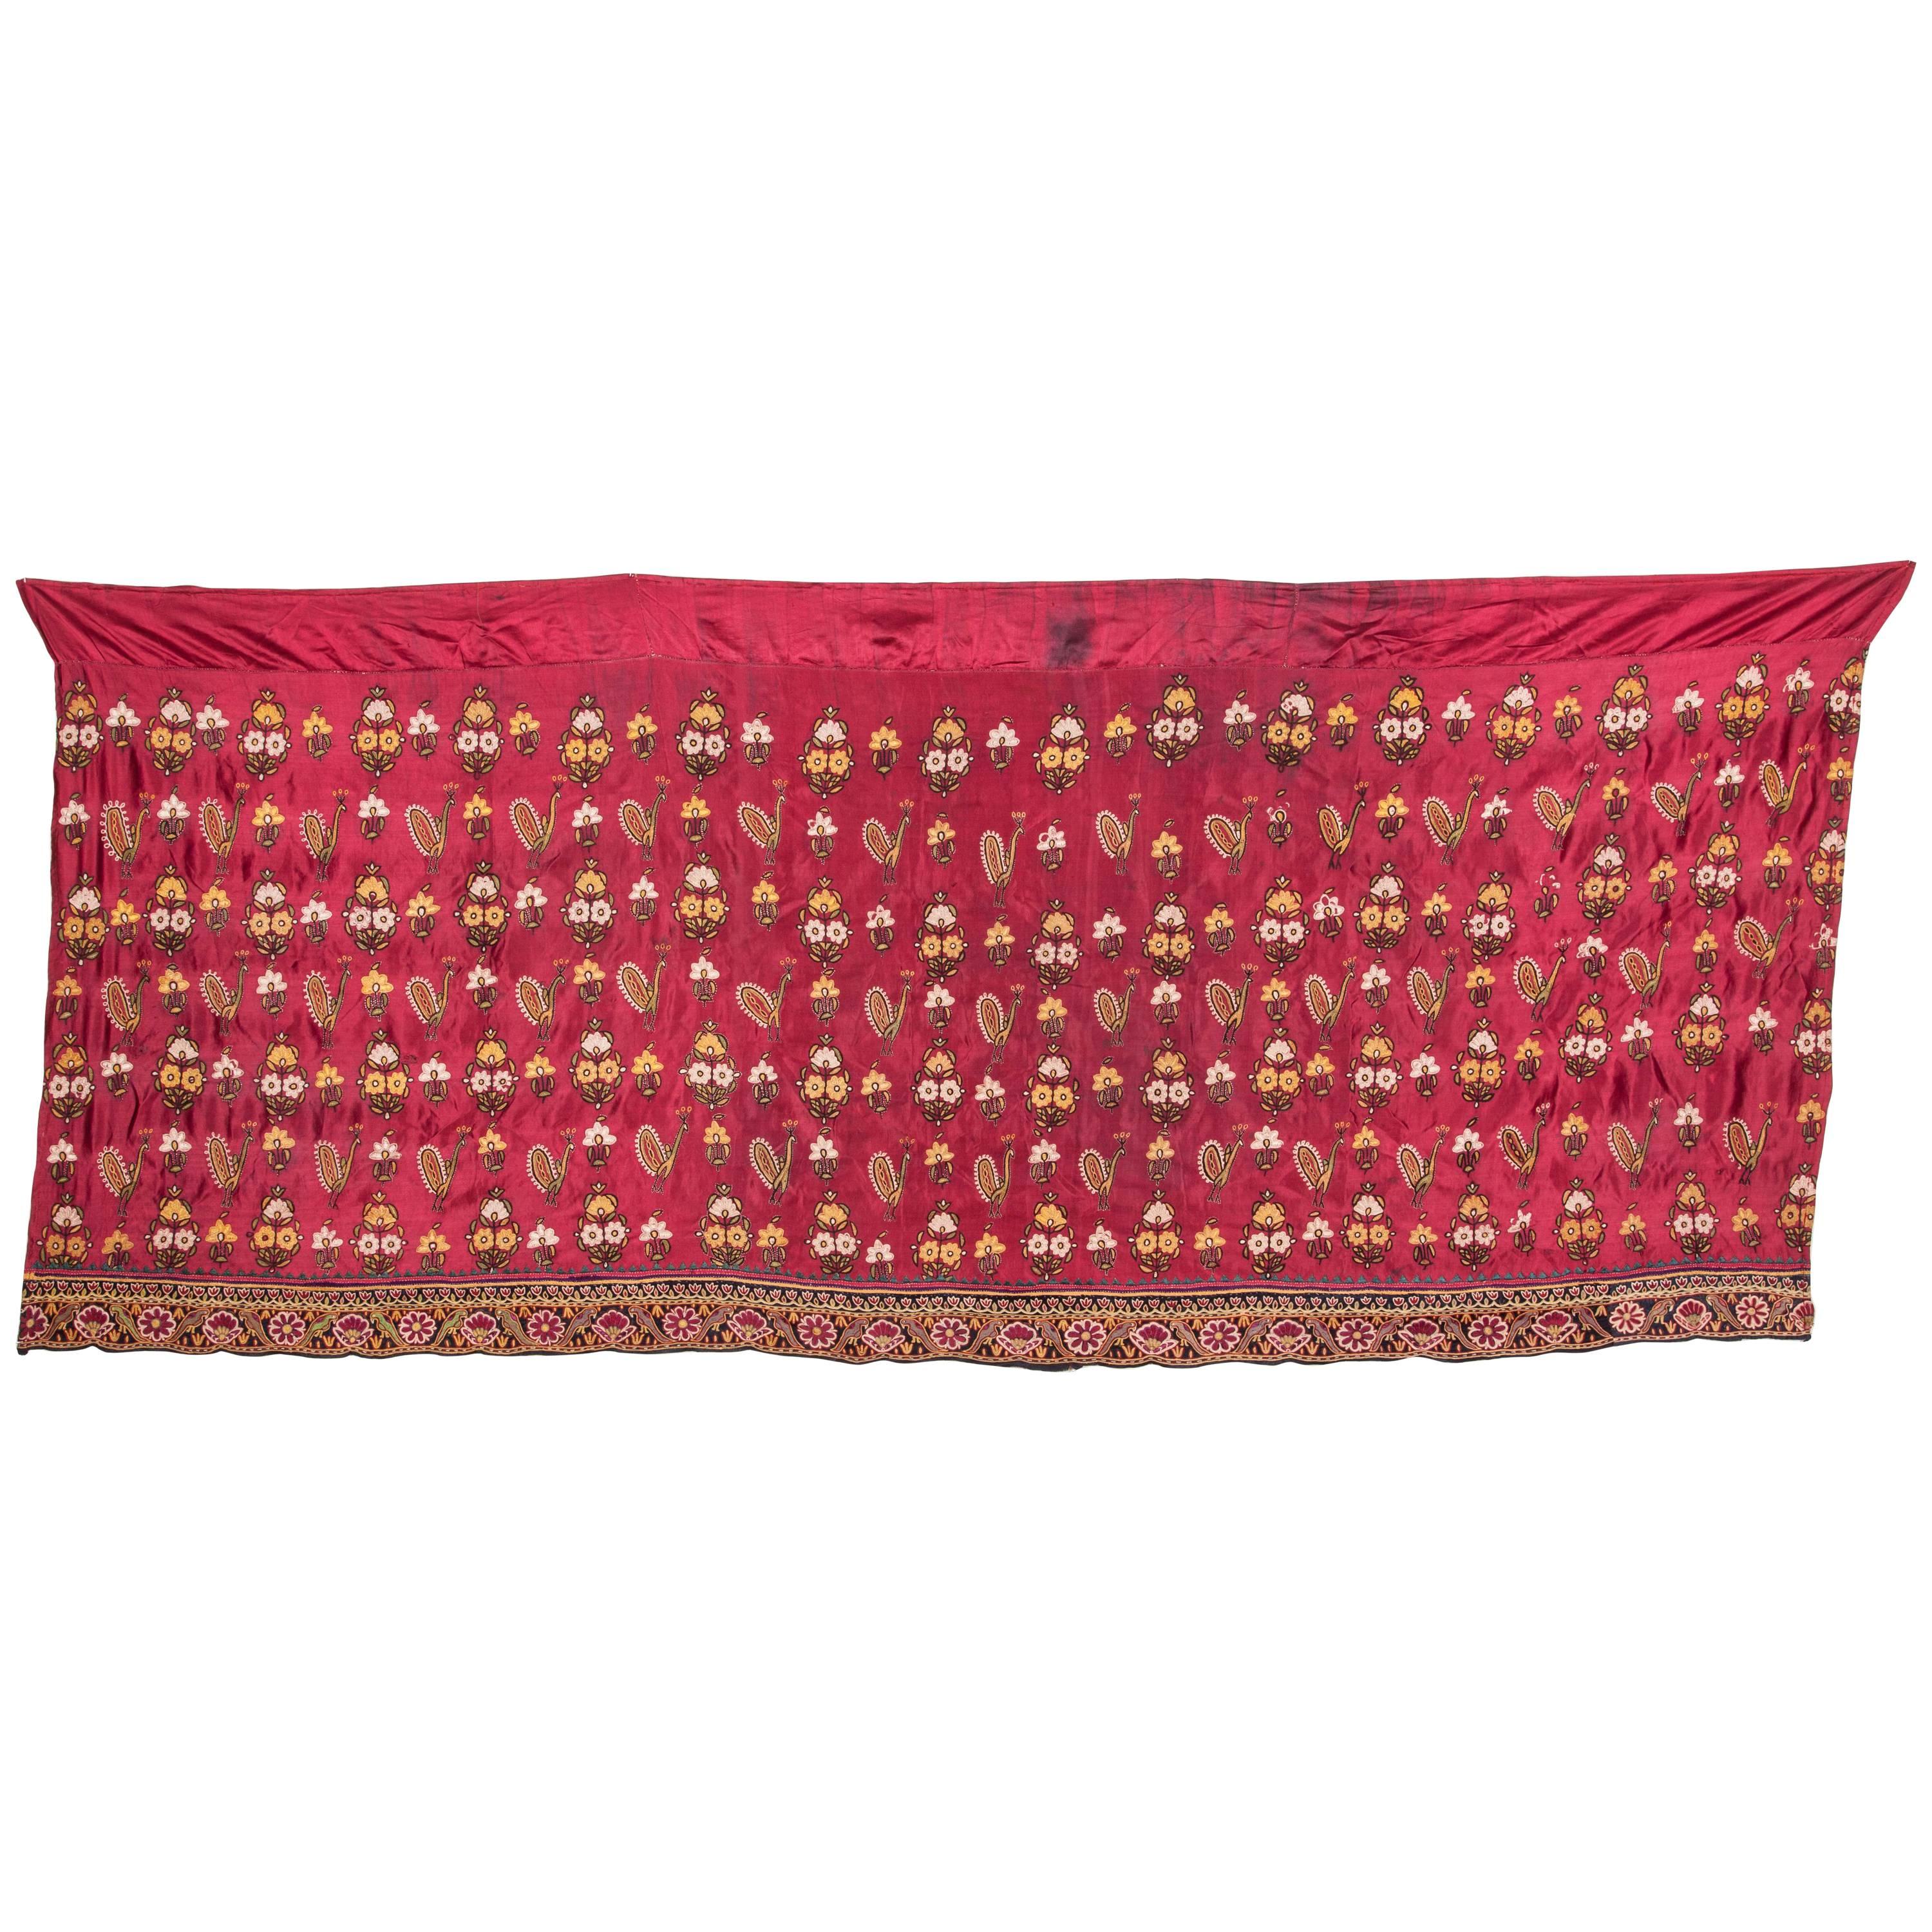 Early 20th Century Embroidered Skirt Panel from Kutch India